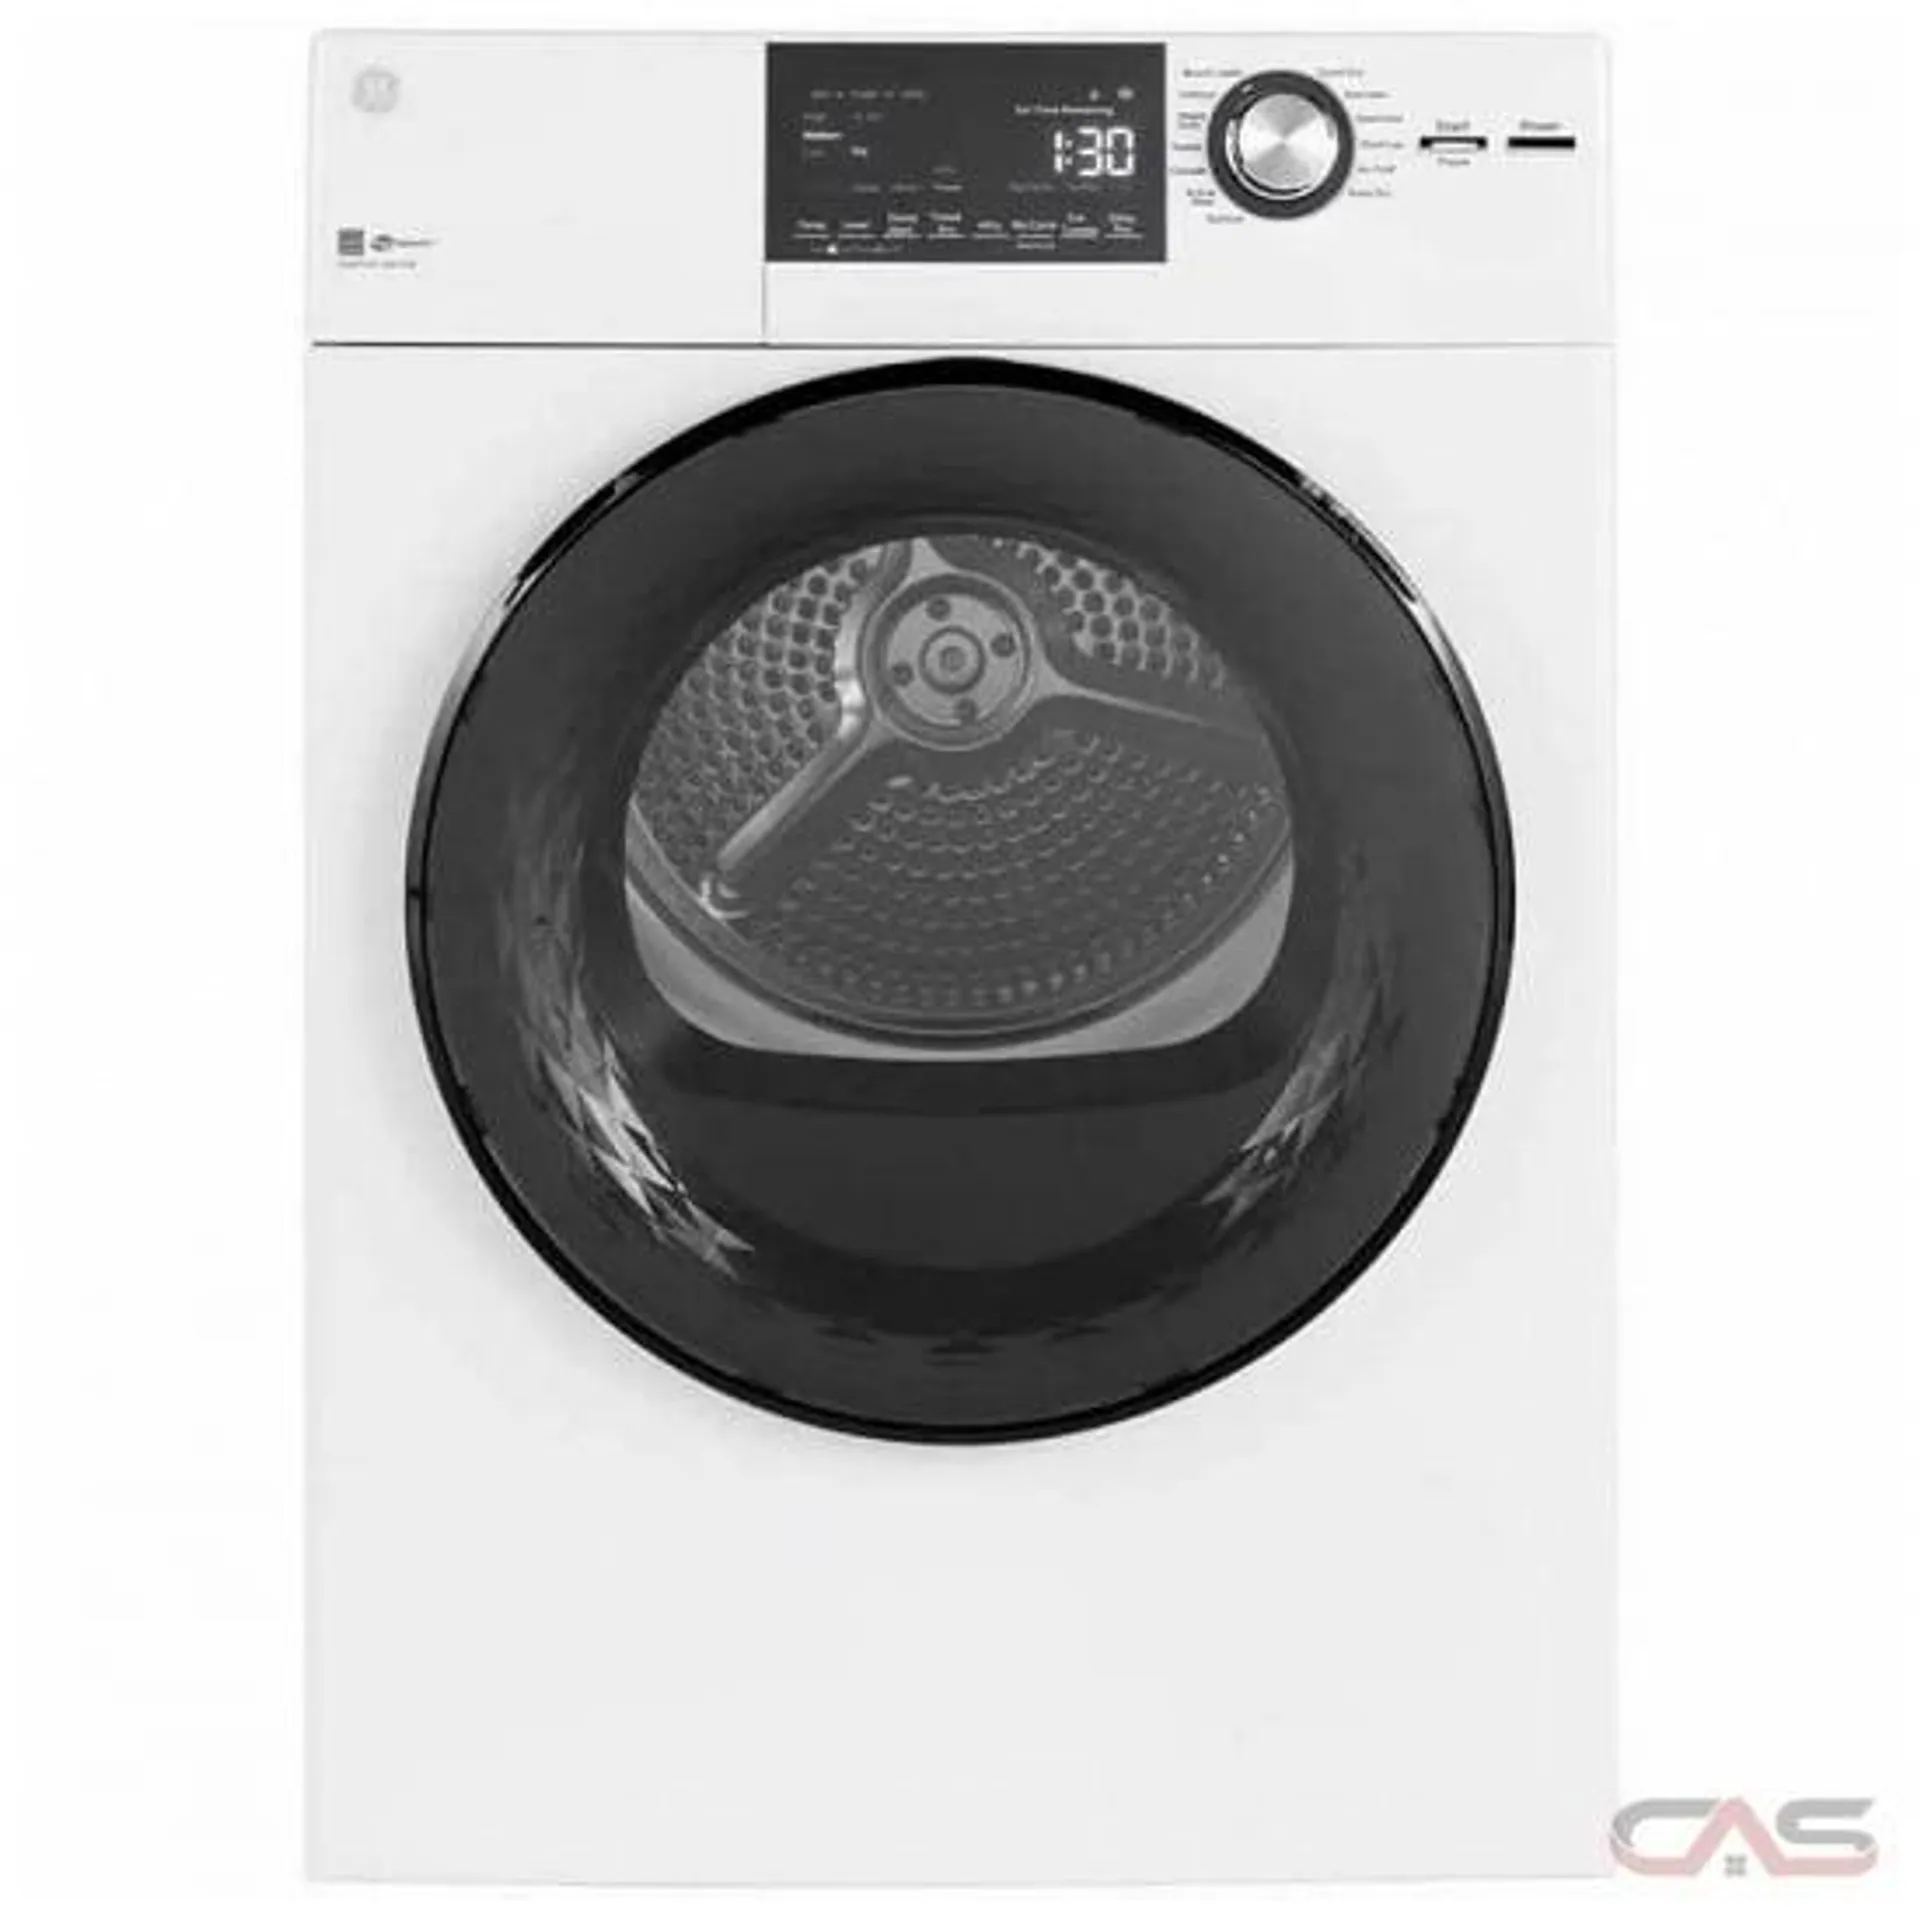 GE GFD14JSINWW Dryer, 24" Width, Electric Dryer, 4.1 cu. ft. Capacity, 13 Dry Cycles, 3 Temperature Settings, Stackable, Steel Drum, White colour Vented Dryer